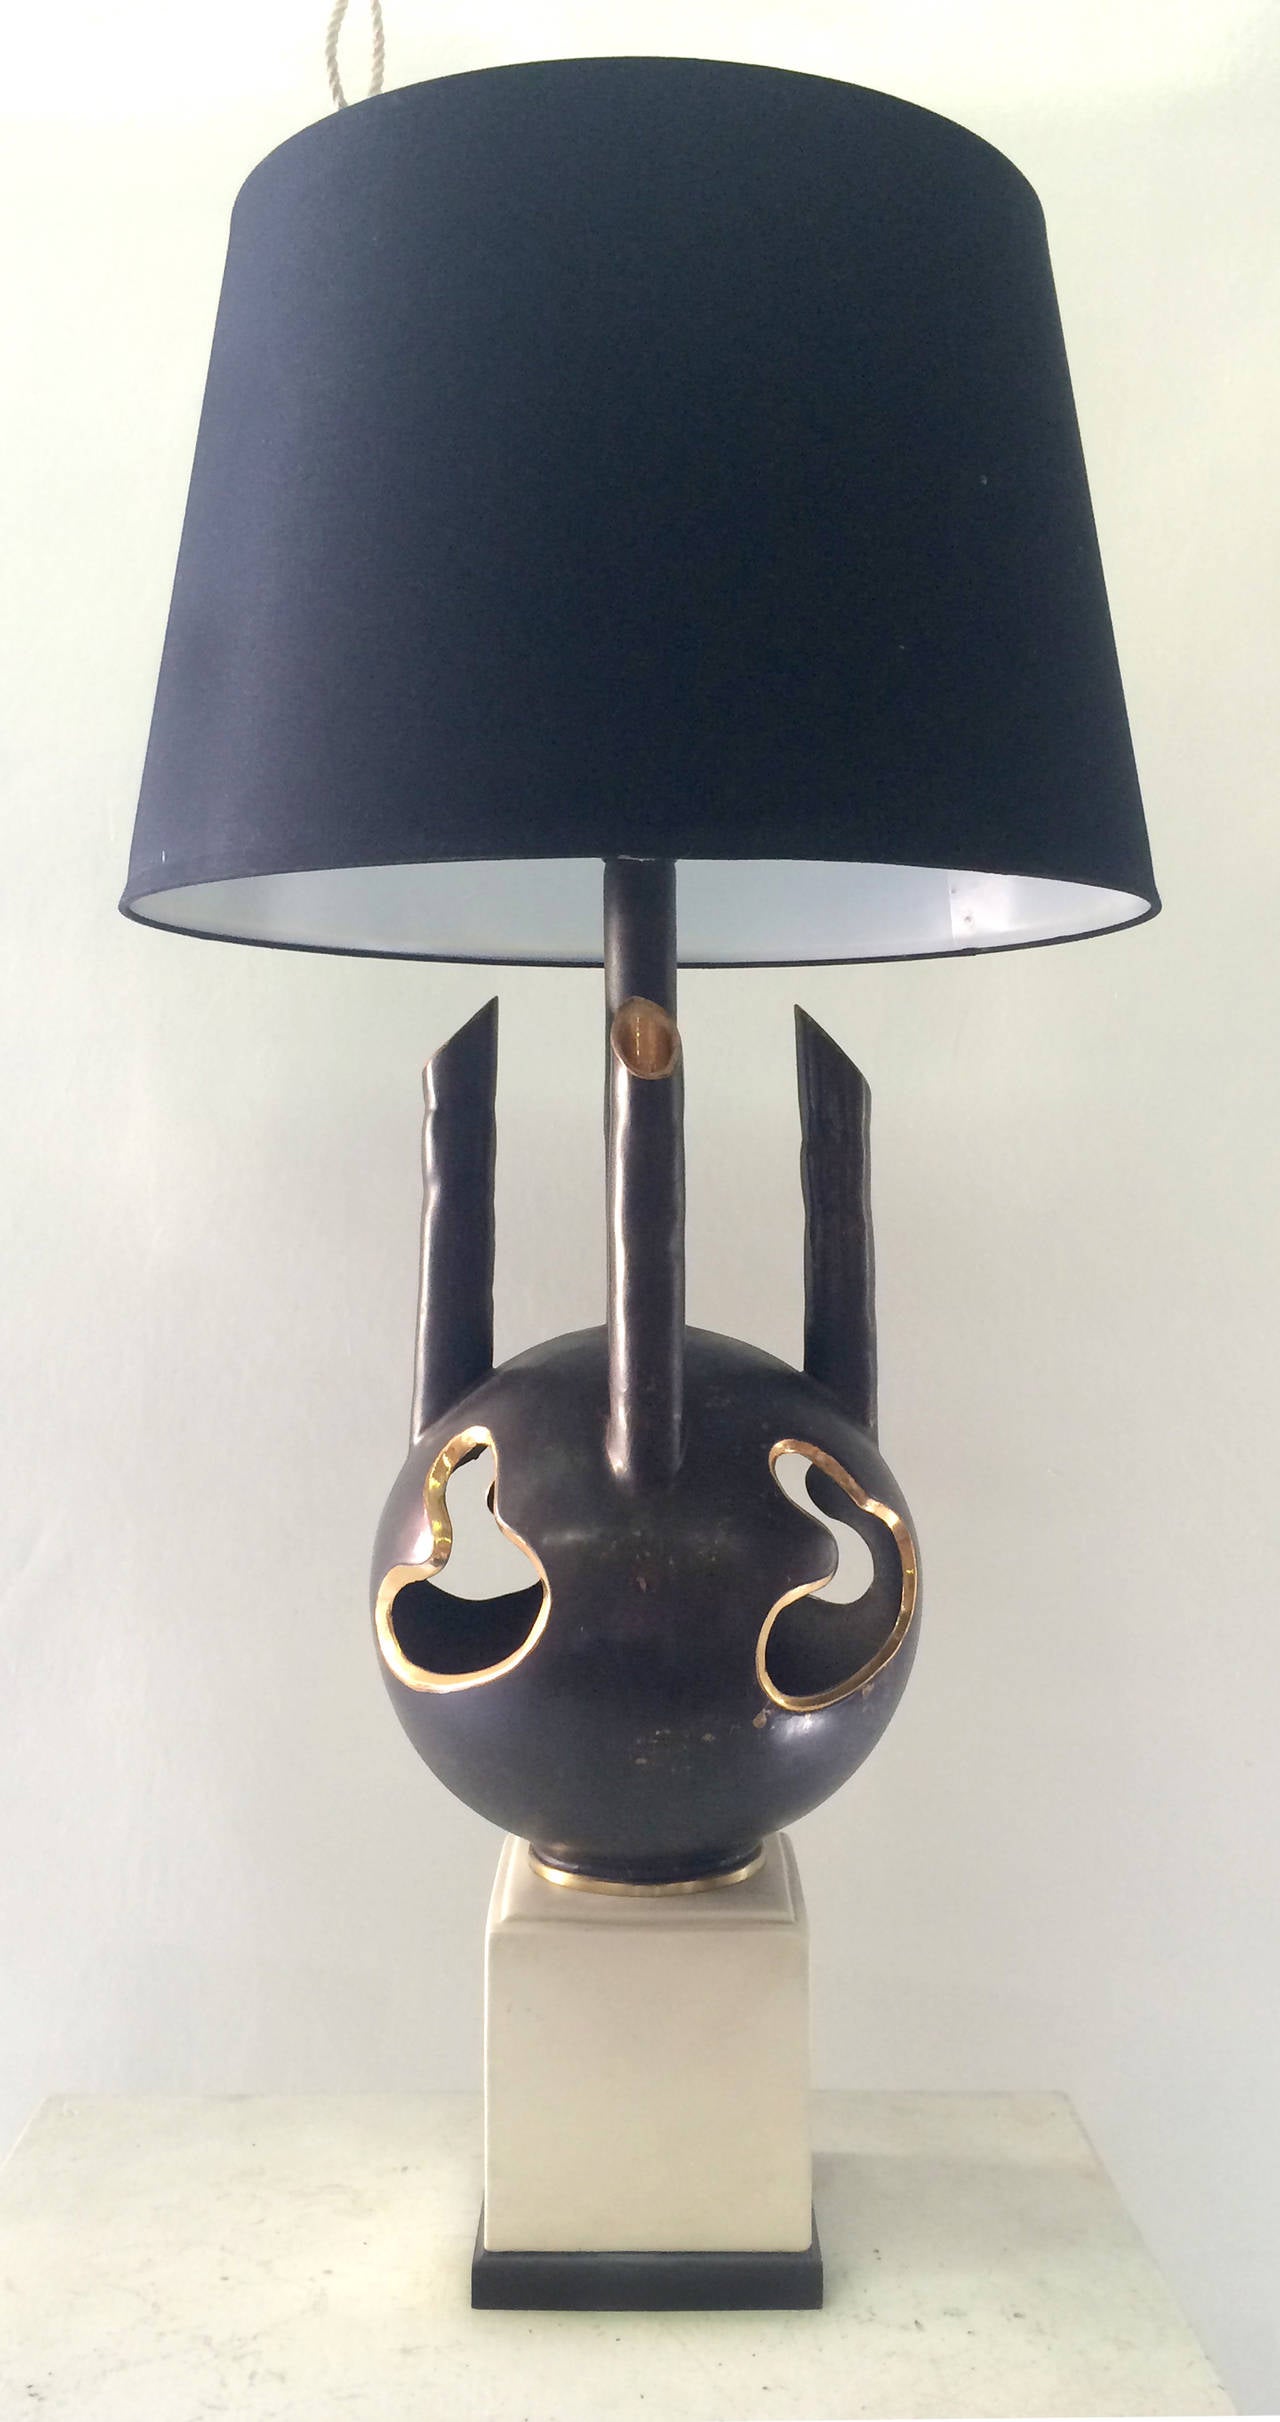 This unusual ceramic table lamp has an arresting, strong design that is emphasized by the size of this piece. The ceramic base features spherical body with gold-rimmed cutouts and four tall, slender hollow branches. It sits upon a white rectangular